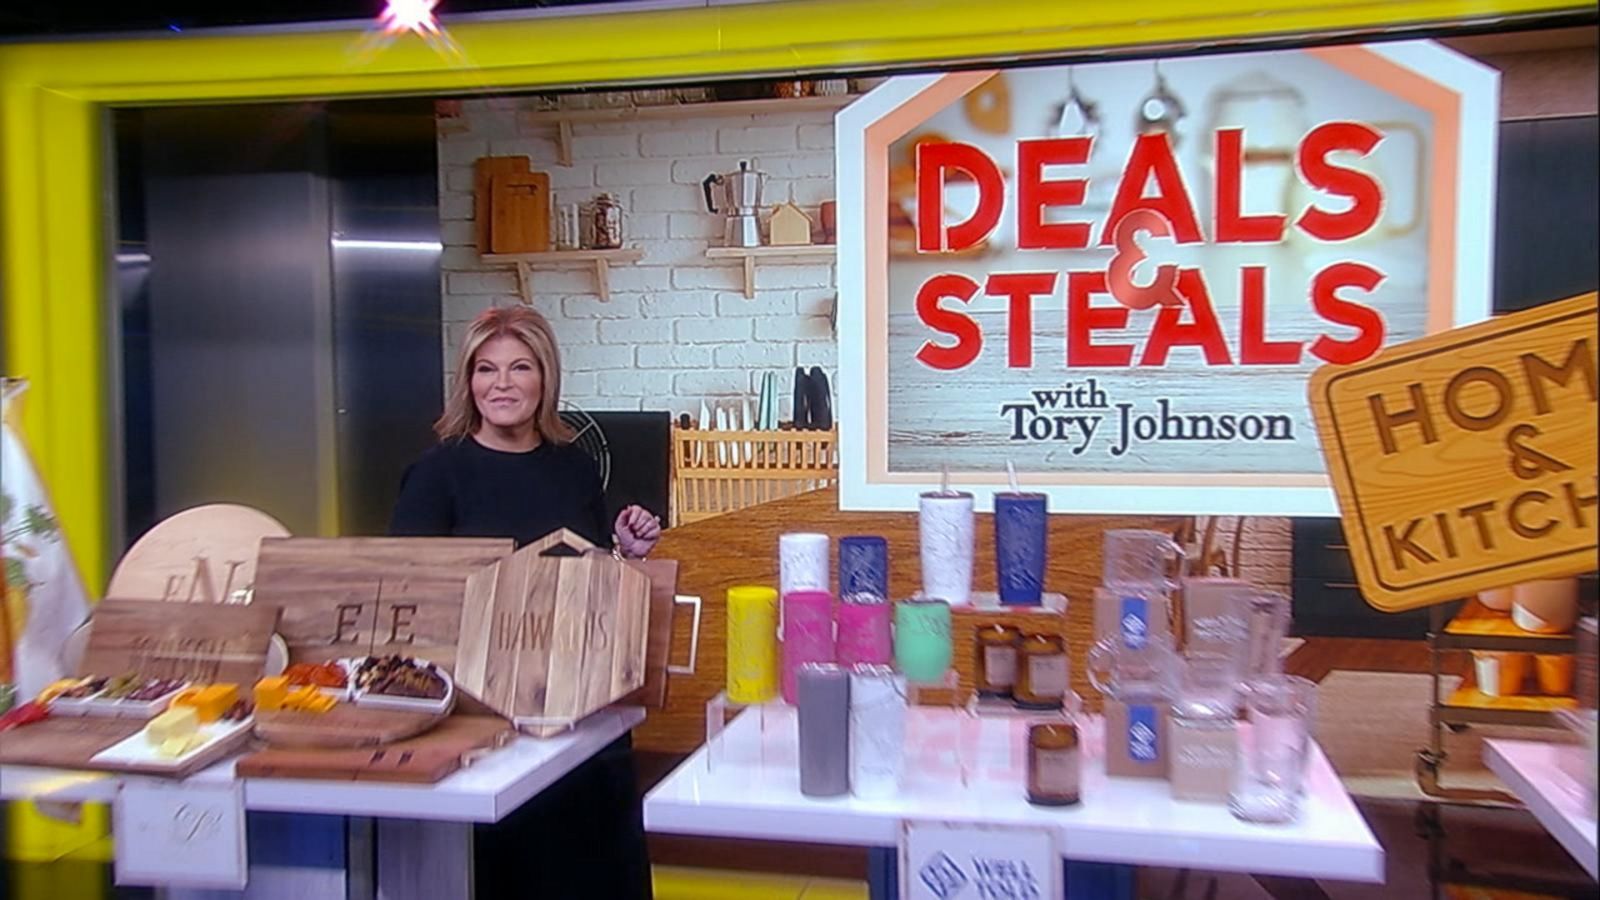 Deals and Steals for the home Good Morning America